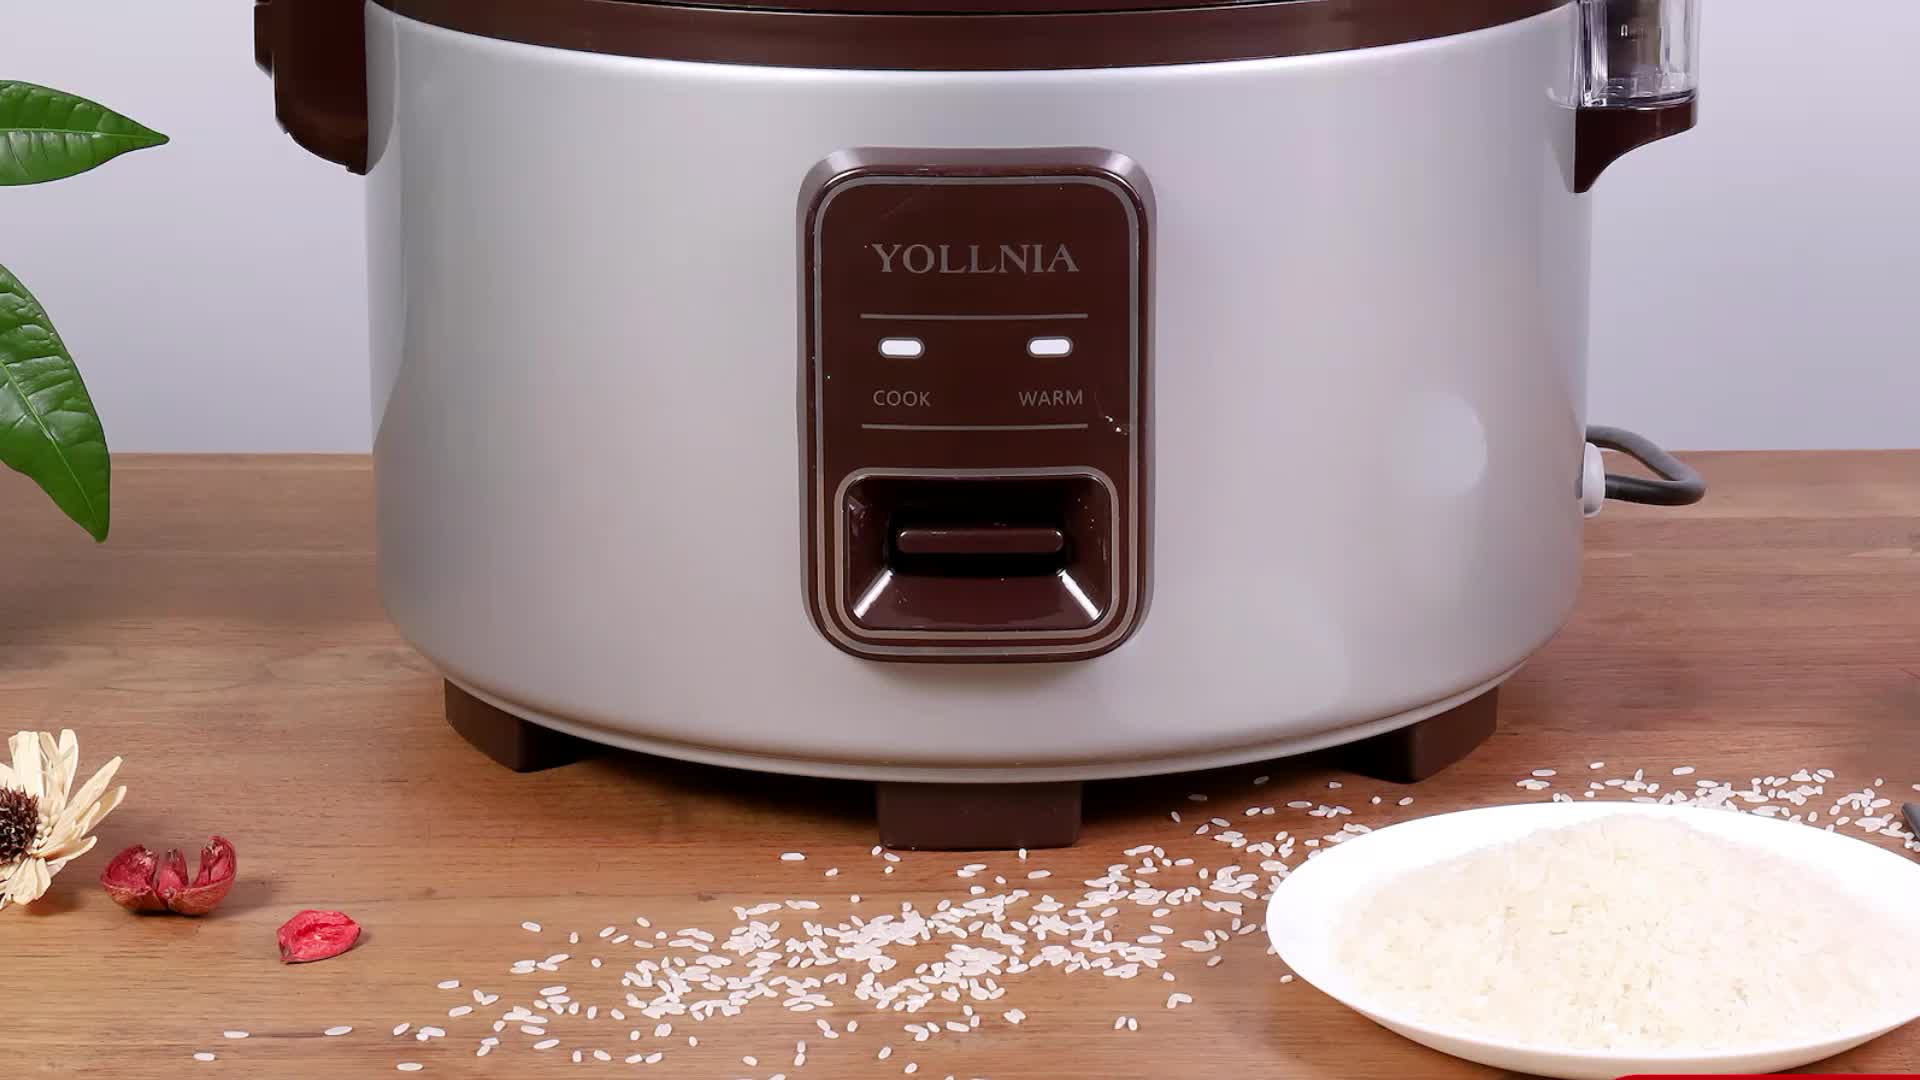 YOLLNIA Commercial Large Rice Cooker & Food warmer | 13.8QT/65 Cup cooked  rice | Non-stick Inner Pot |Auto Warmer Mode |1350W Fast Cooking